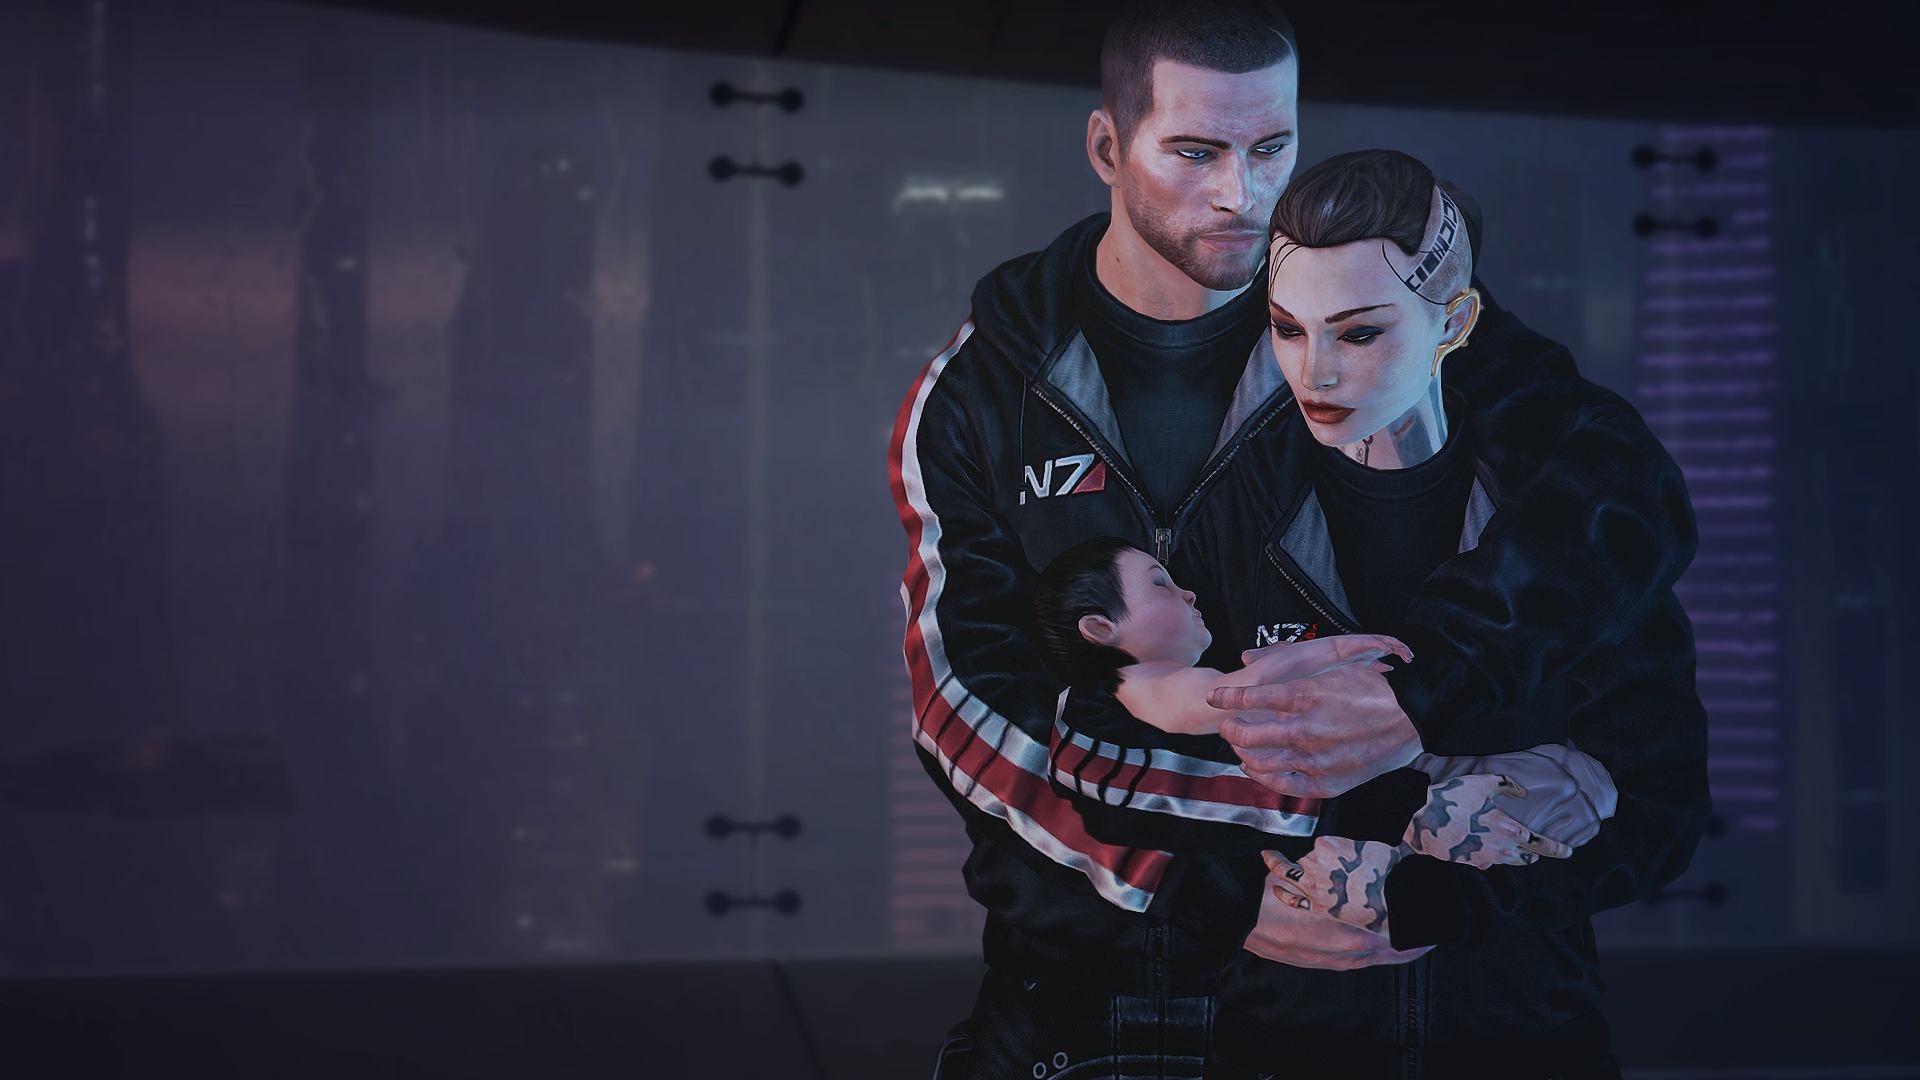 General 1920x1080 Mass Effect video games video game art science fiction Commander Shepard video game girls video game men baby science fiction women Science Fiction Men Video Game Heroes PC gaming